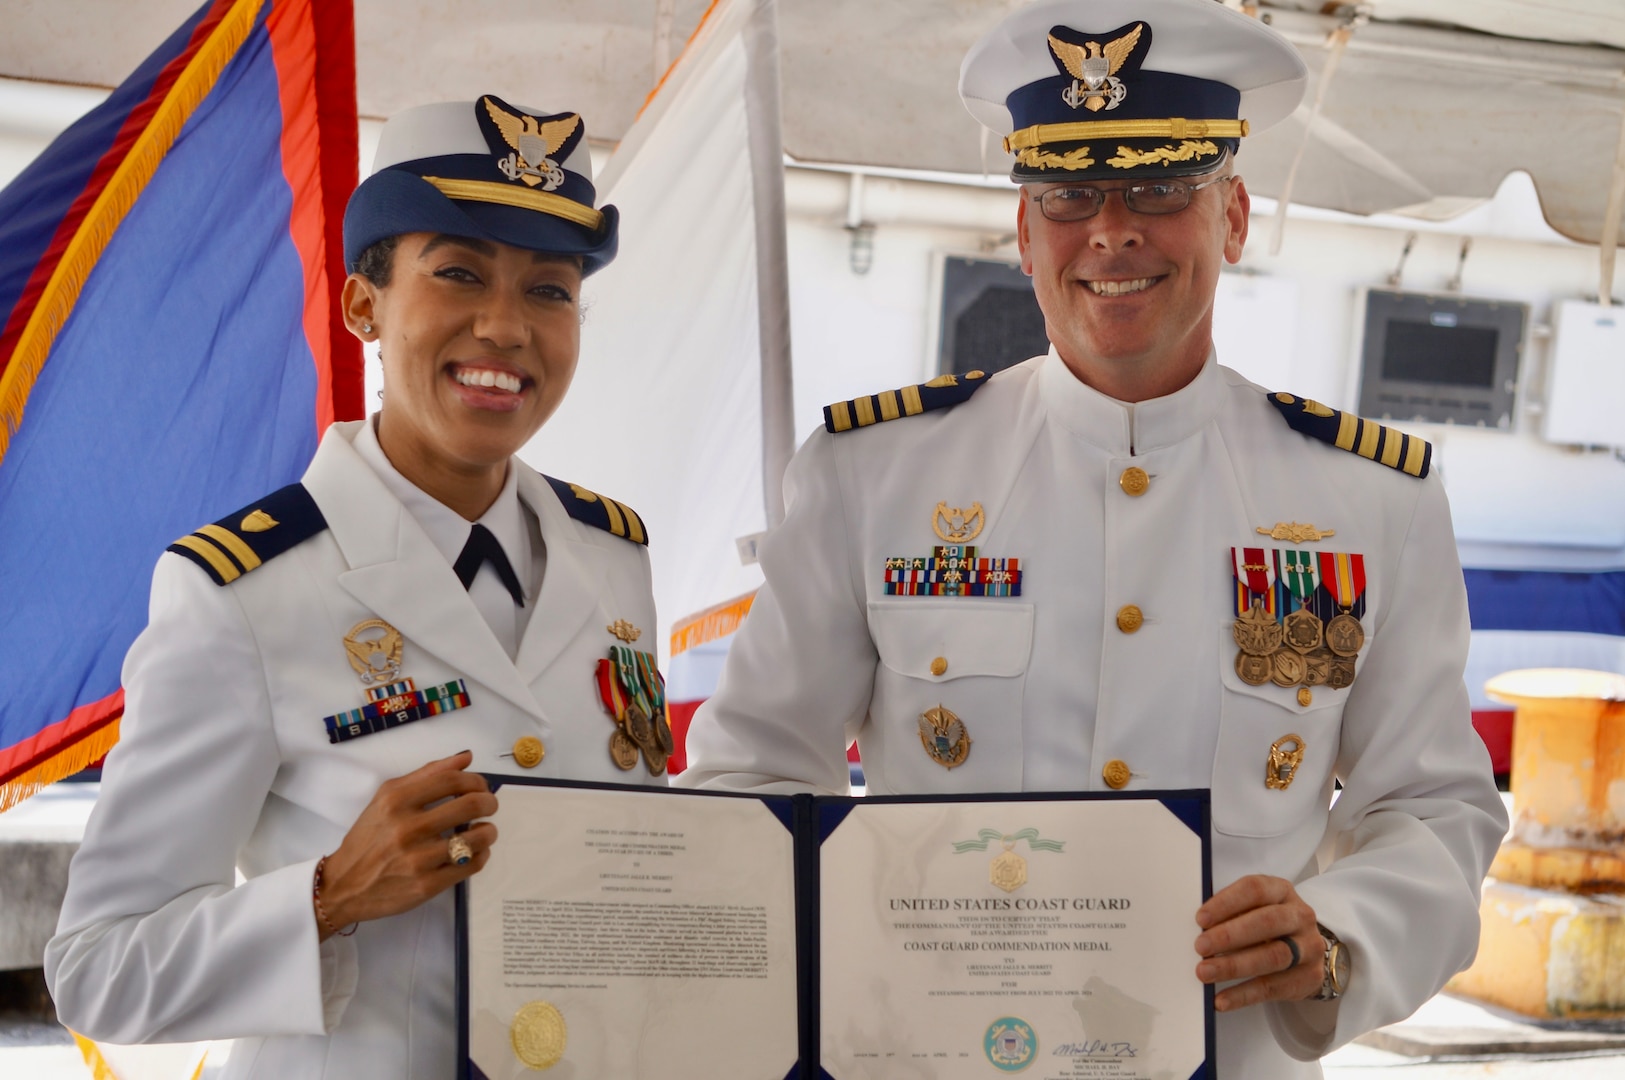 Lt. Emma Saunders takes command of USCGC Myrtle Hazard (WPC 1139) from Lt. Jalle Merritt in a change of command ceremony at Victor Pier in Apra Harbor, Guam, on April 19, 2024. After two years as commanding officer, Merritt leaves Guam to join the vice commandant's staff as military aide. (U.S. Coast Guard photo by Chief Warrant Officer Sara Muir)